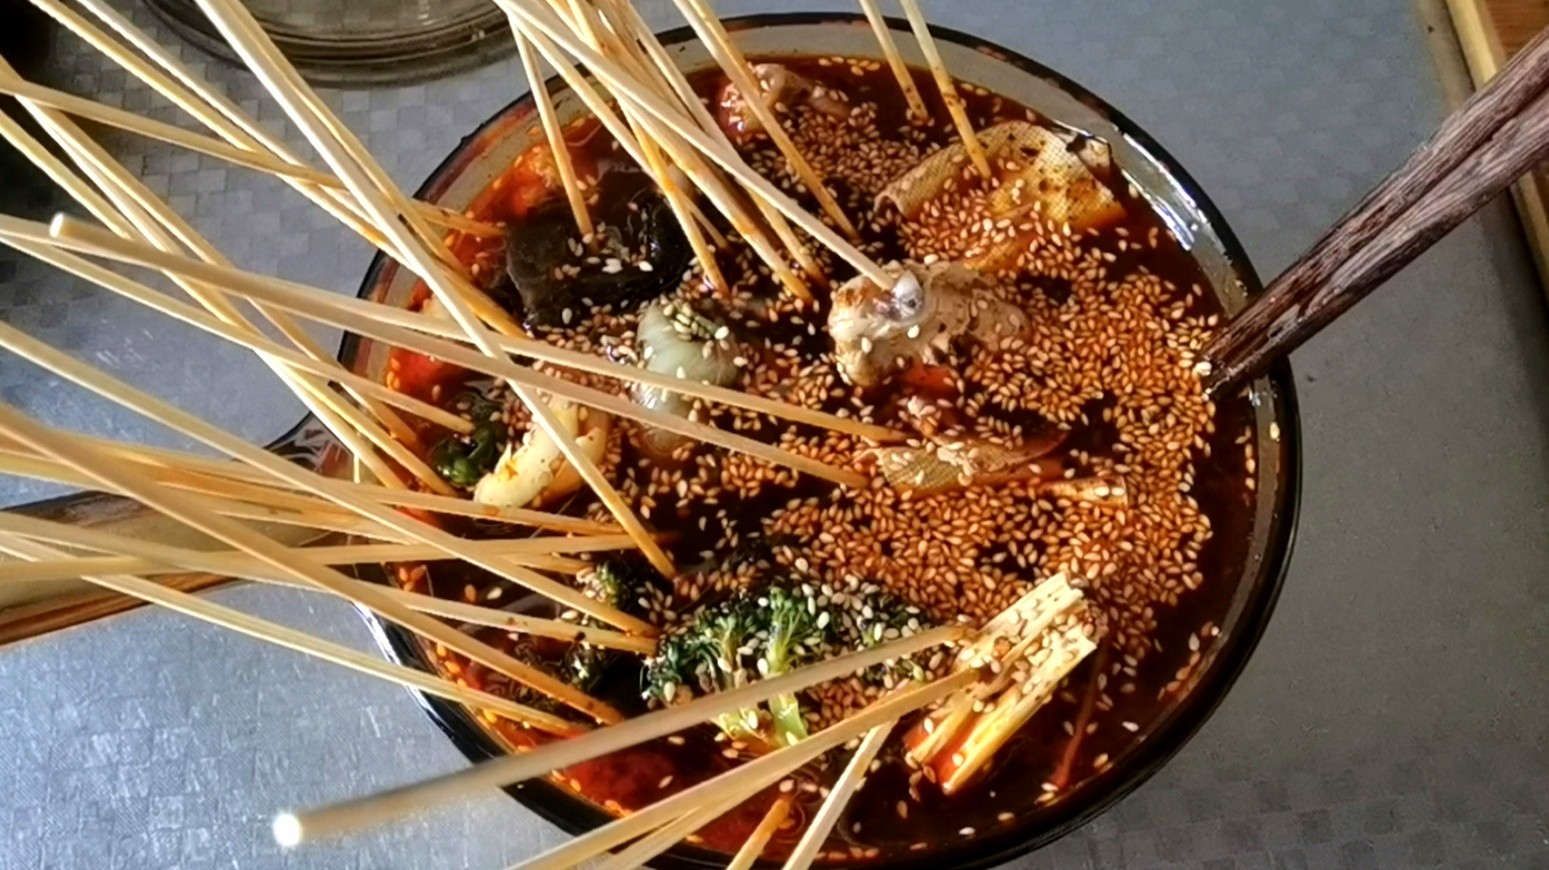 Sichuan’s Famous Dish of Bobo Chicken is Made at Home at Low Cost, So recipe